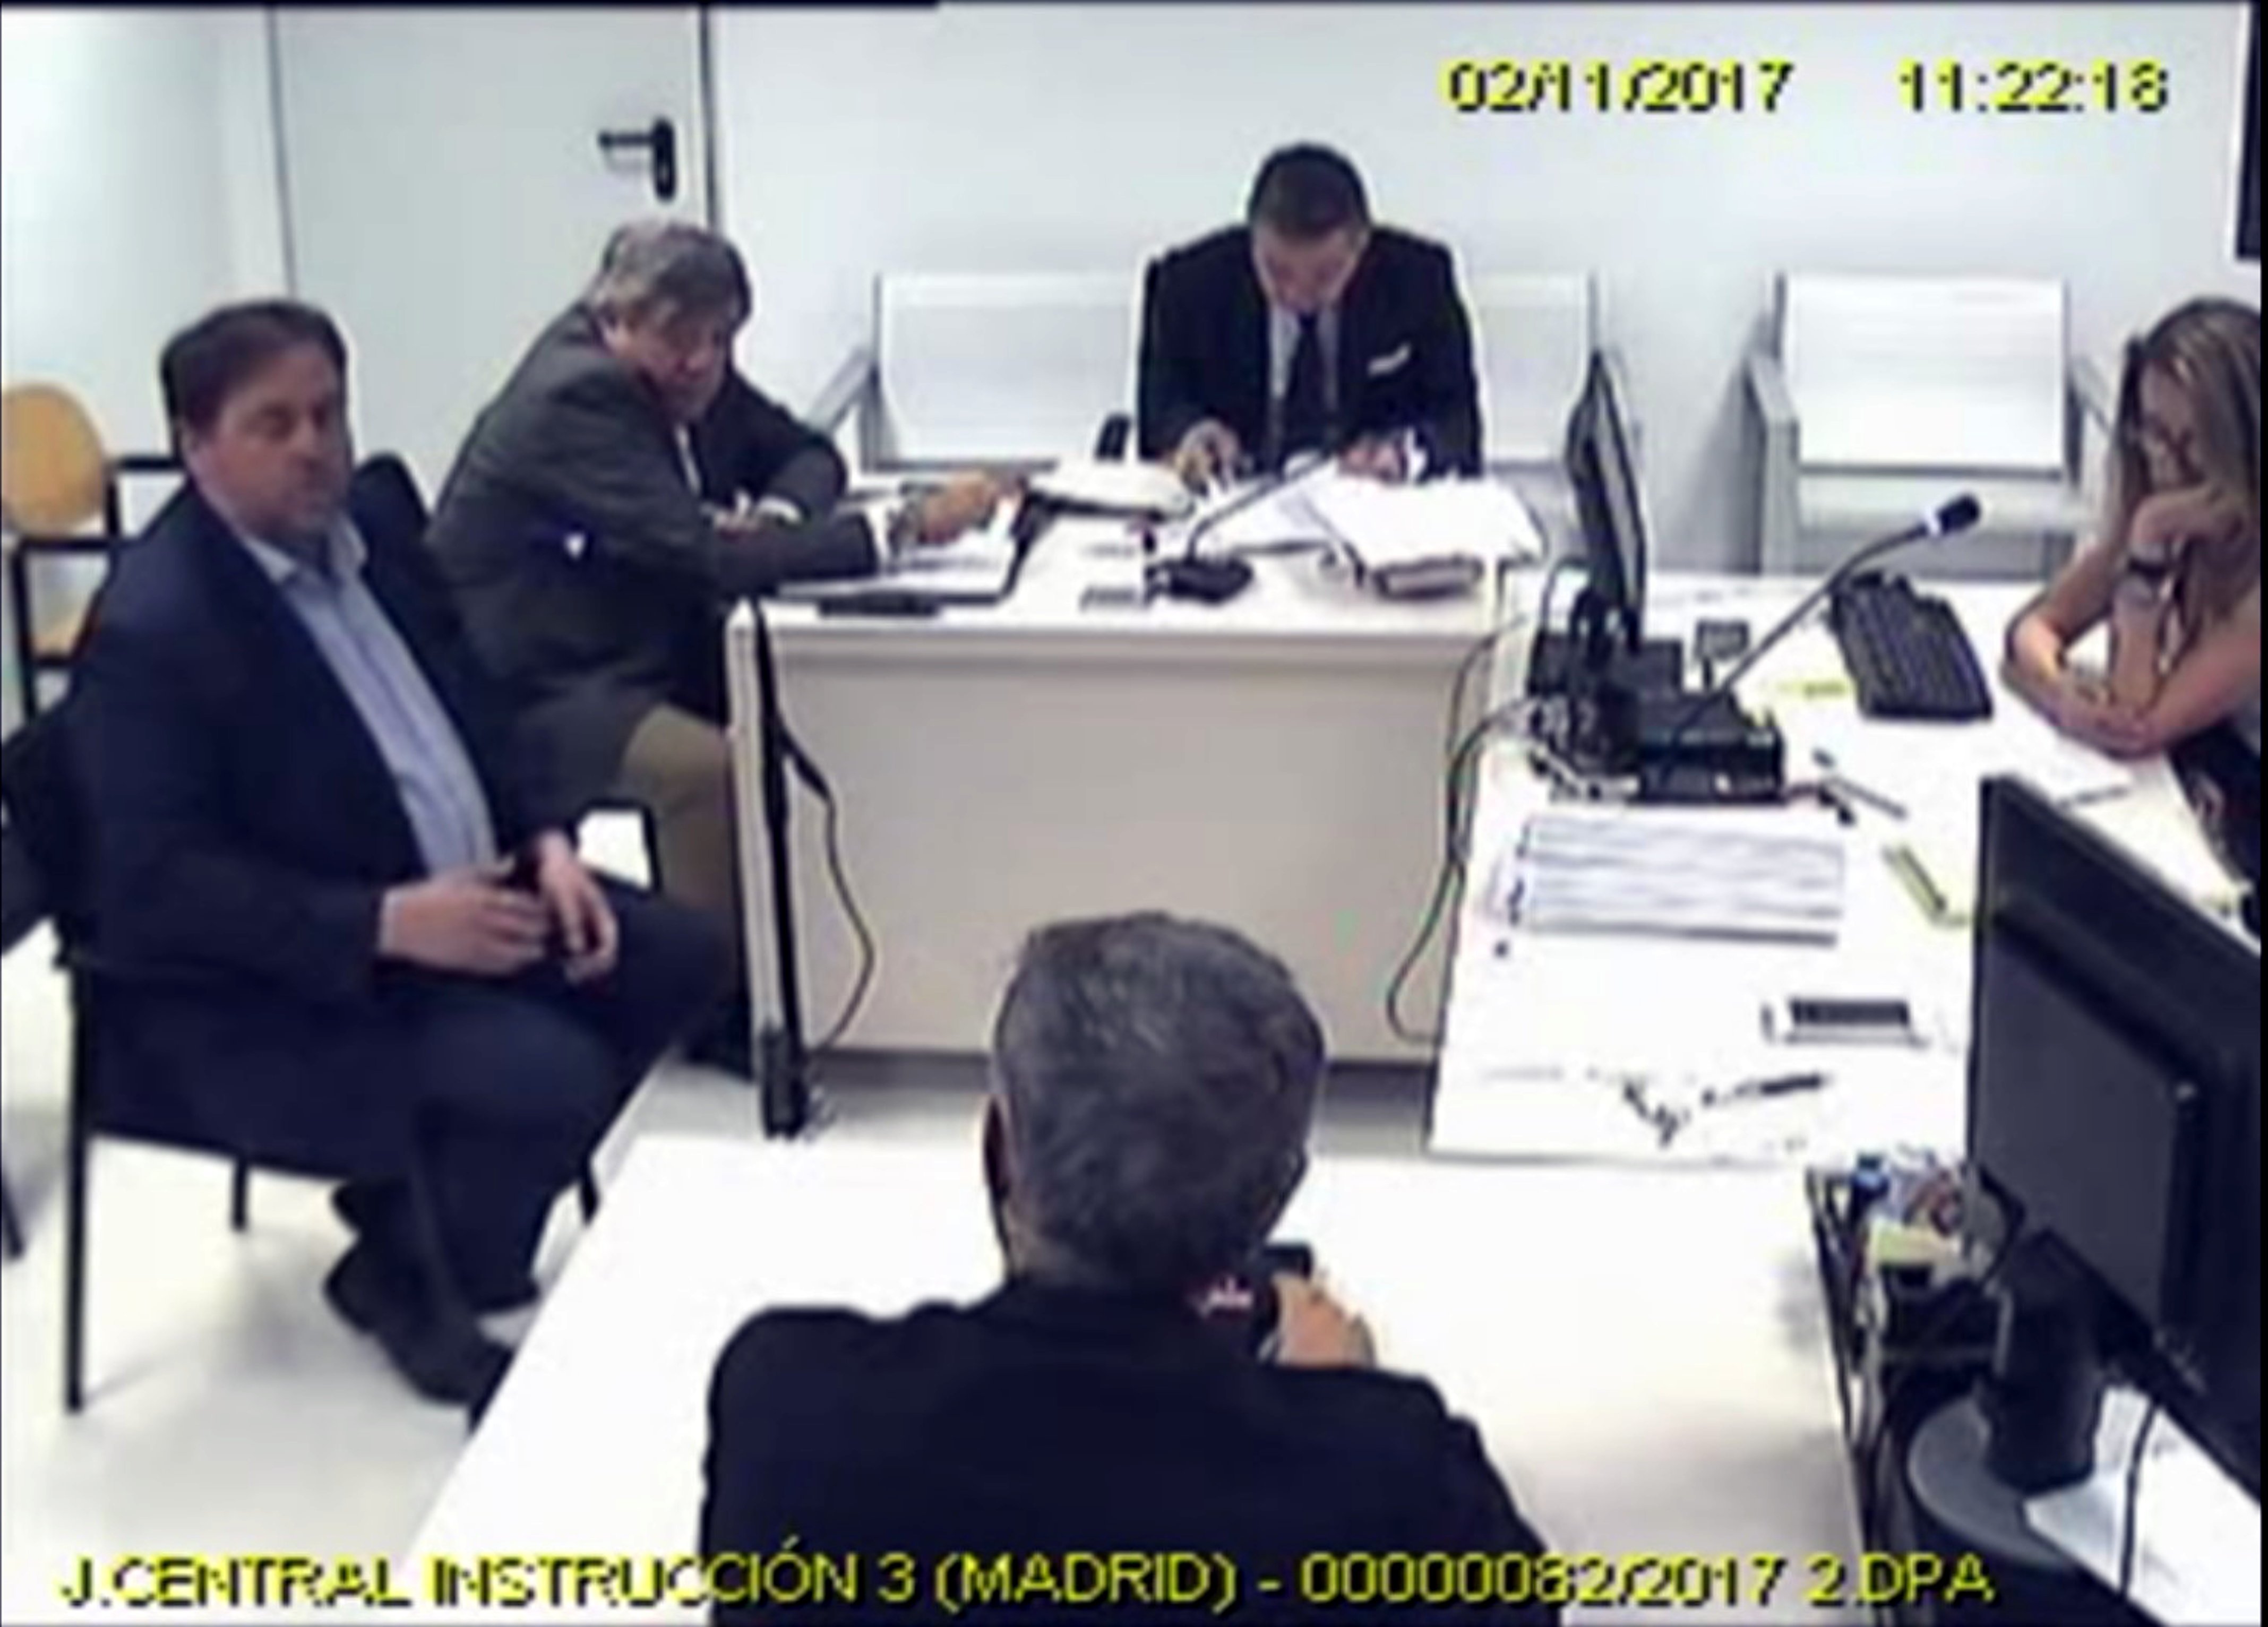 Video: Catalan politicians testifying in court last year before being imprisoned